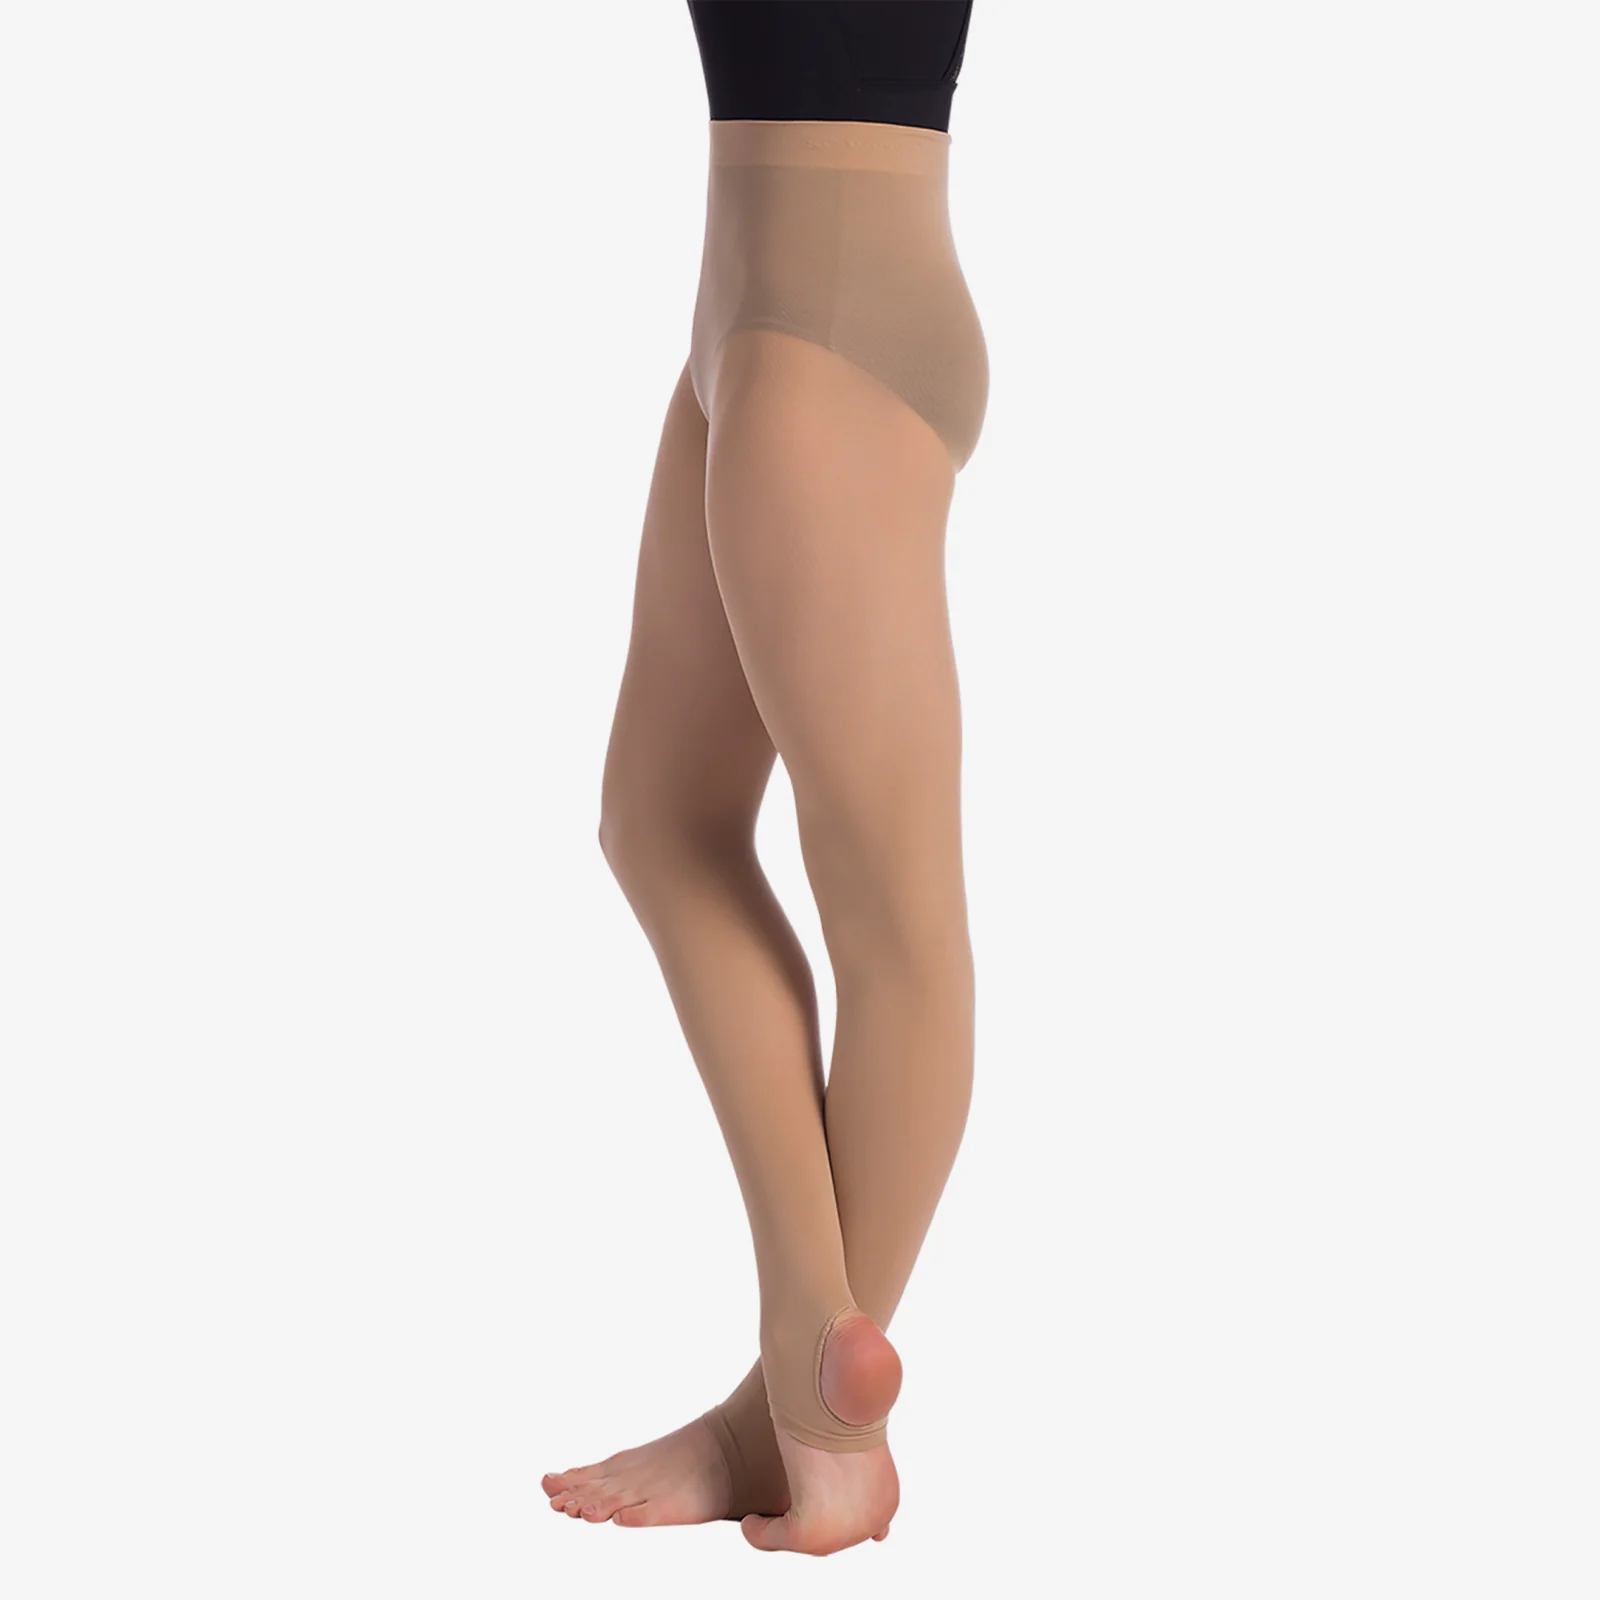 Tightspot Dancewear Ctr - $34.99 clear or nude strap & and clear